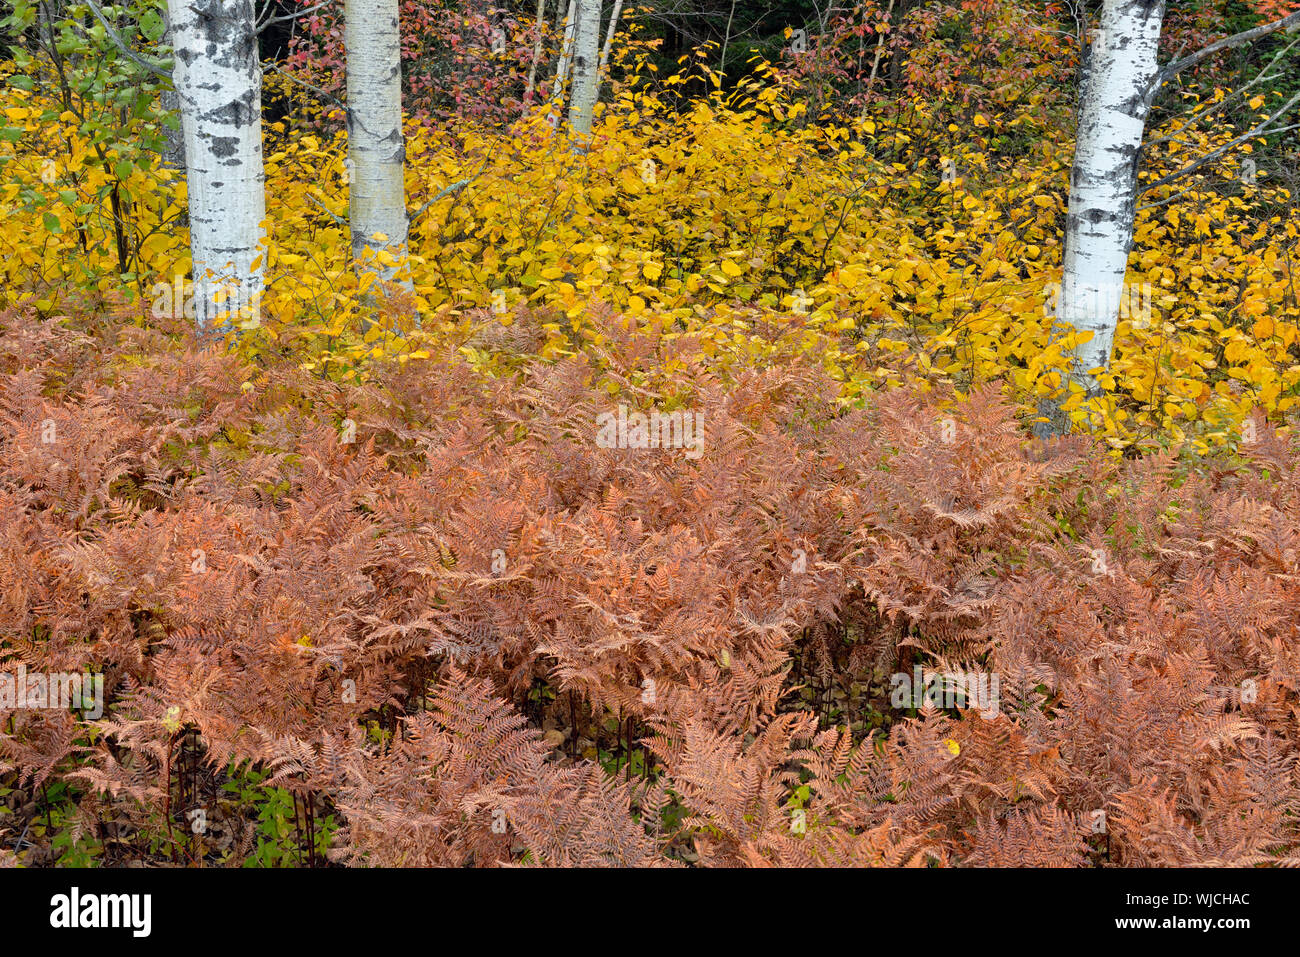 Autumn shrubs and ferns in the understory of an aspen and birch woodland, Greater Sudbury, Ontario, Canada Stock Photo